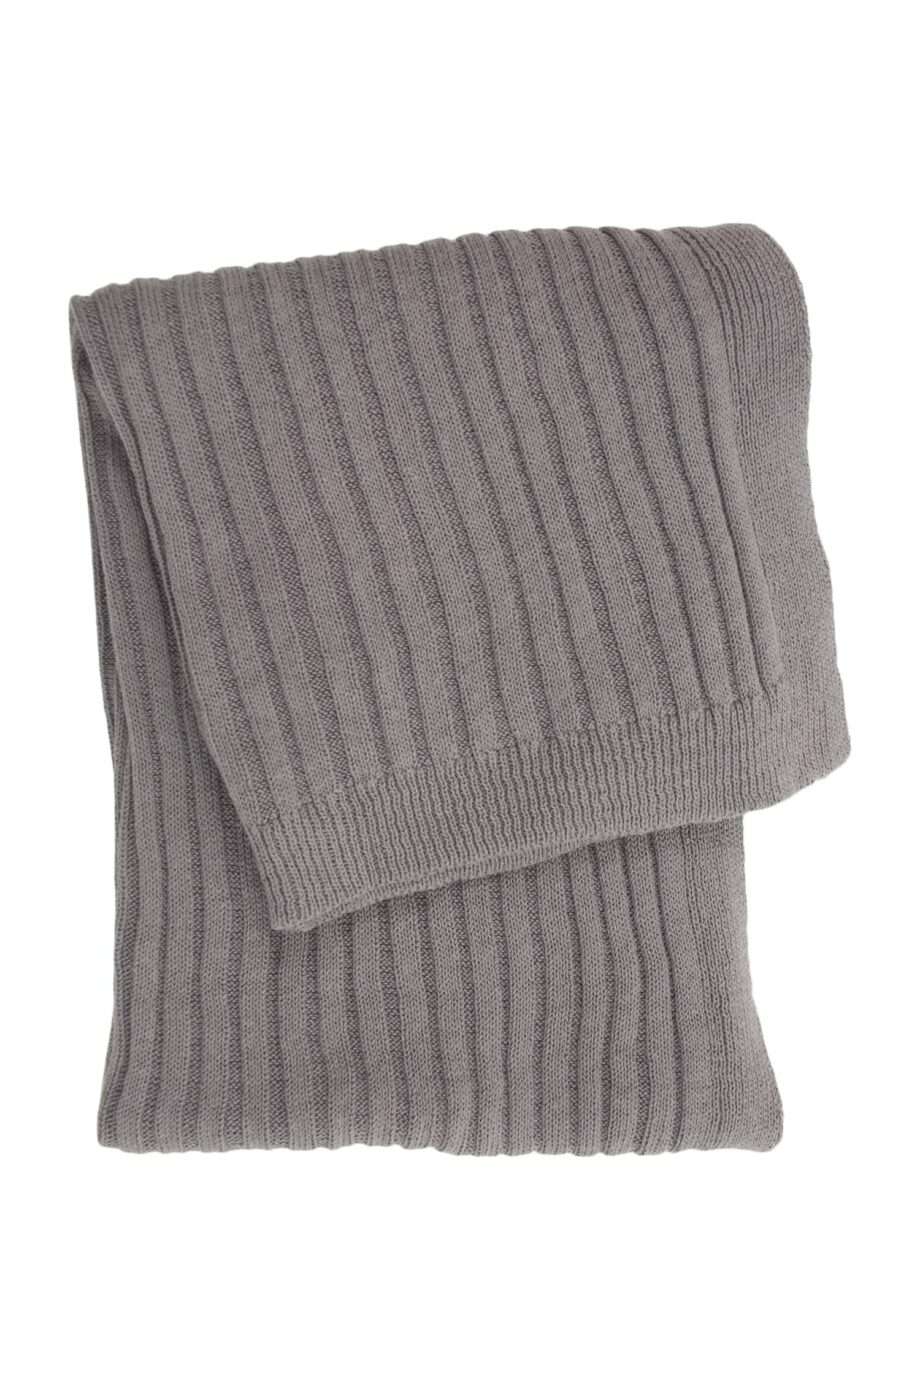 ribs small grey knitted cotton little blanket small